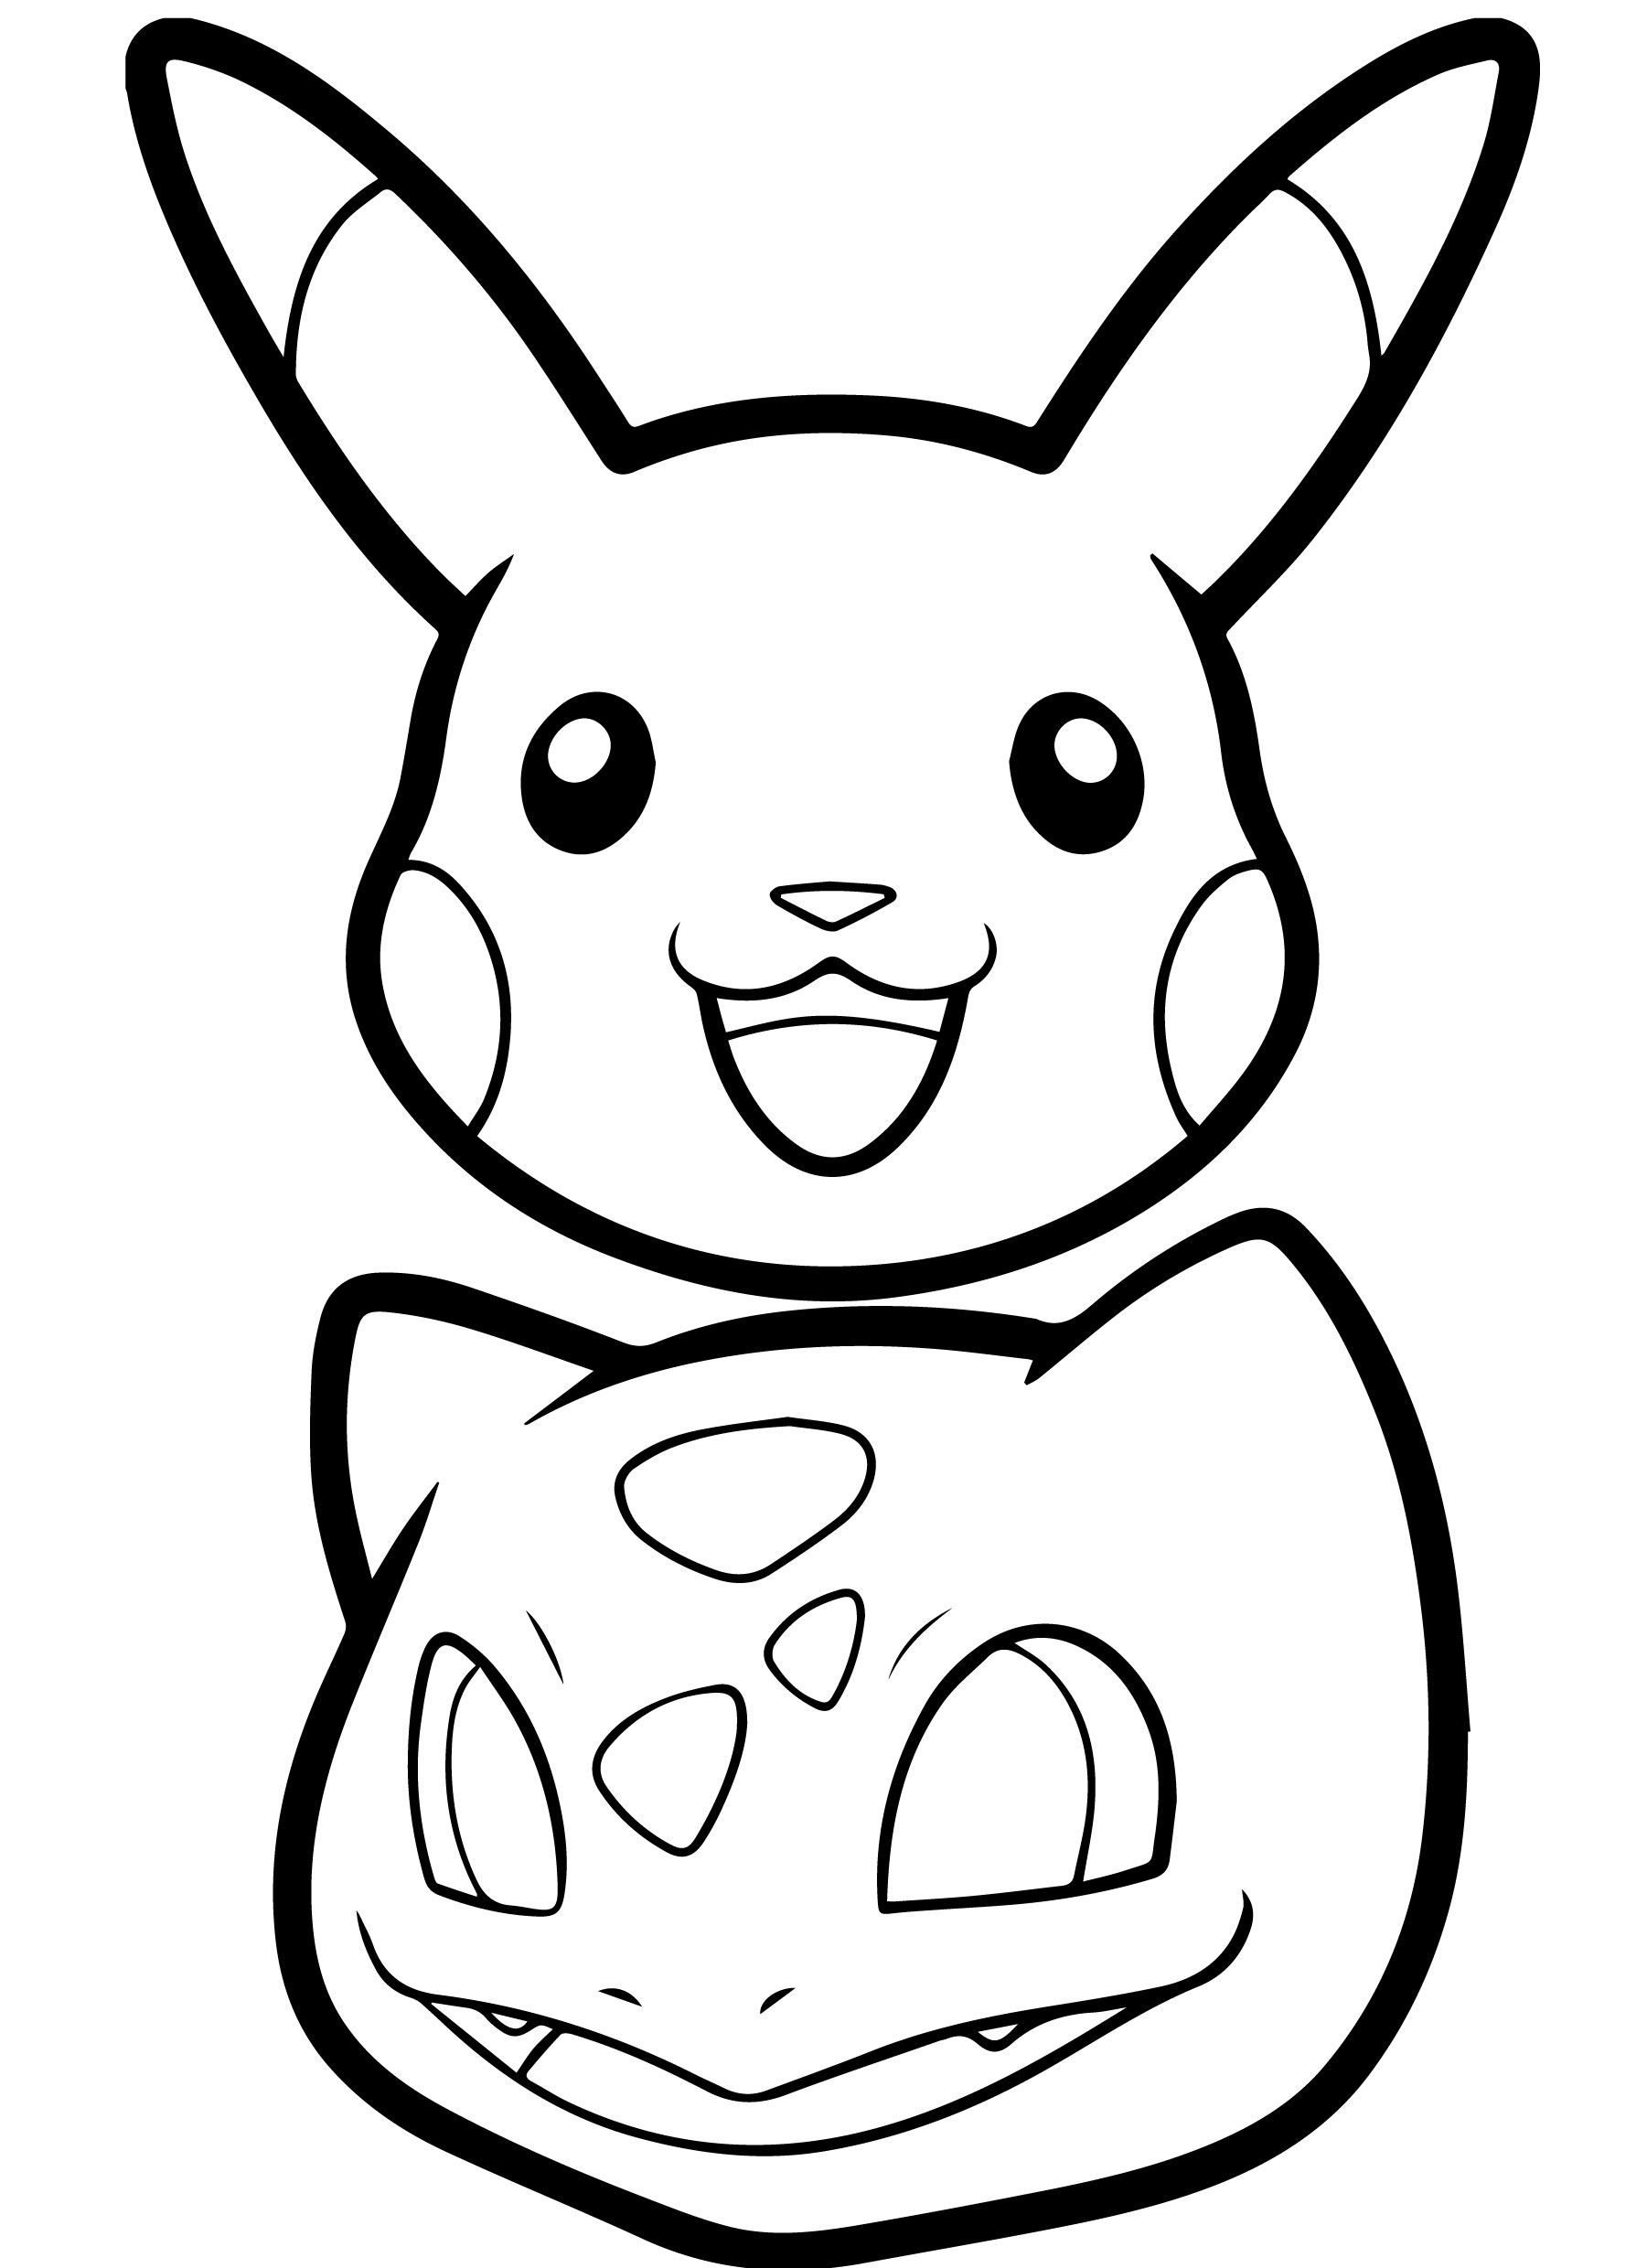 Pikachu coloring pages head pikachu coloring page pokemon coloring pages minion coloring pages